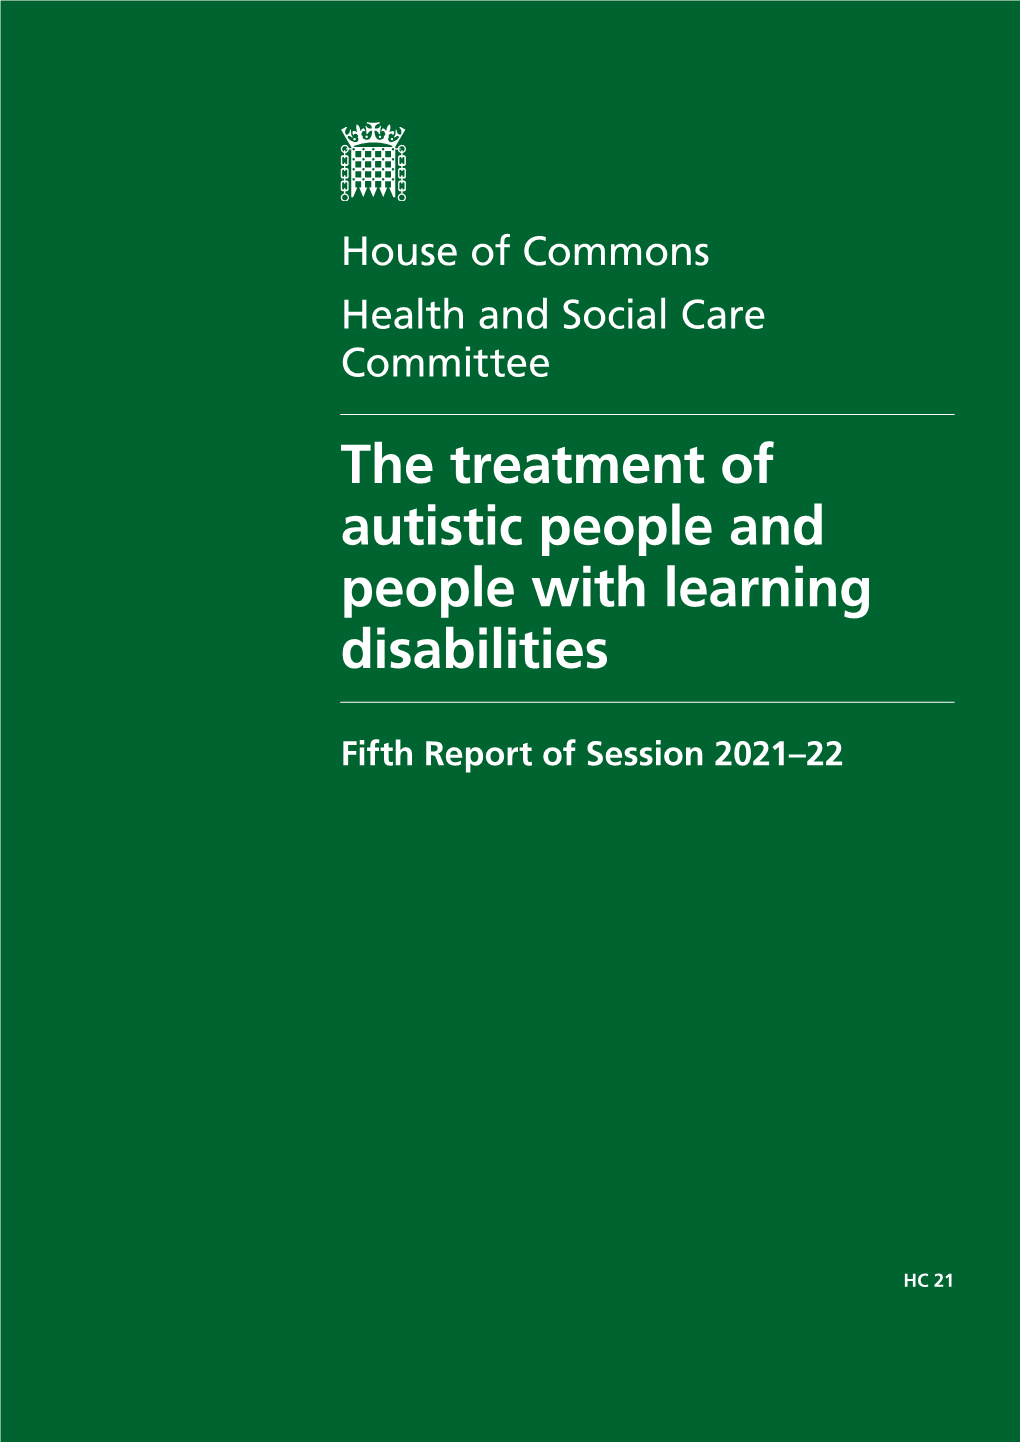 Treatment of Autistic People and Individuals with Learning Disabilities